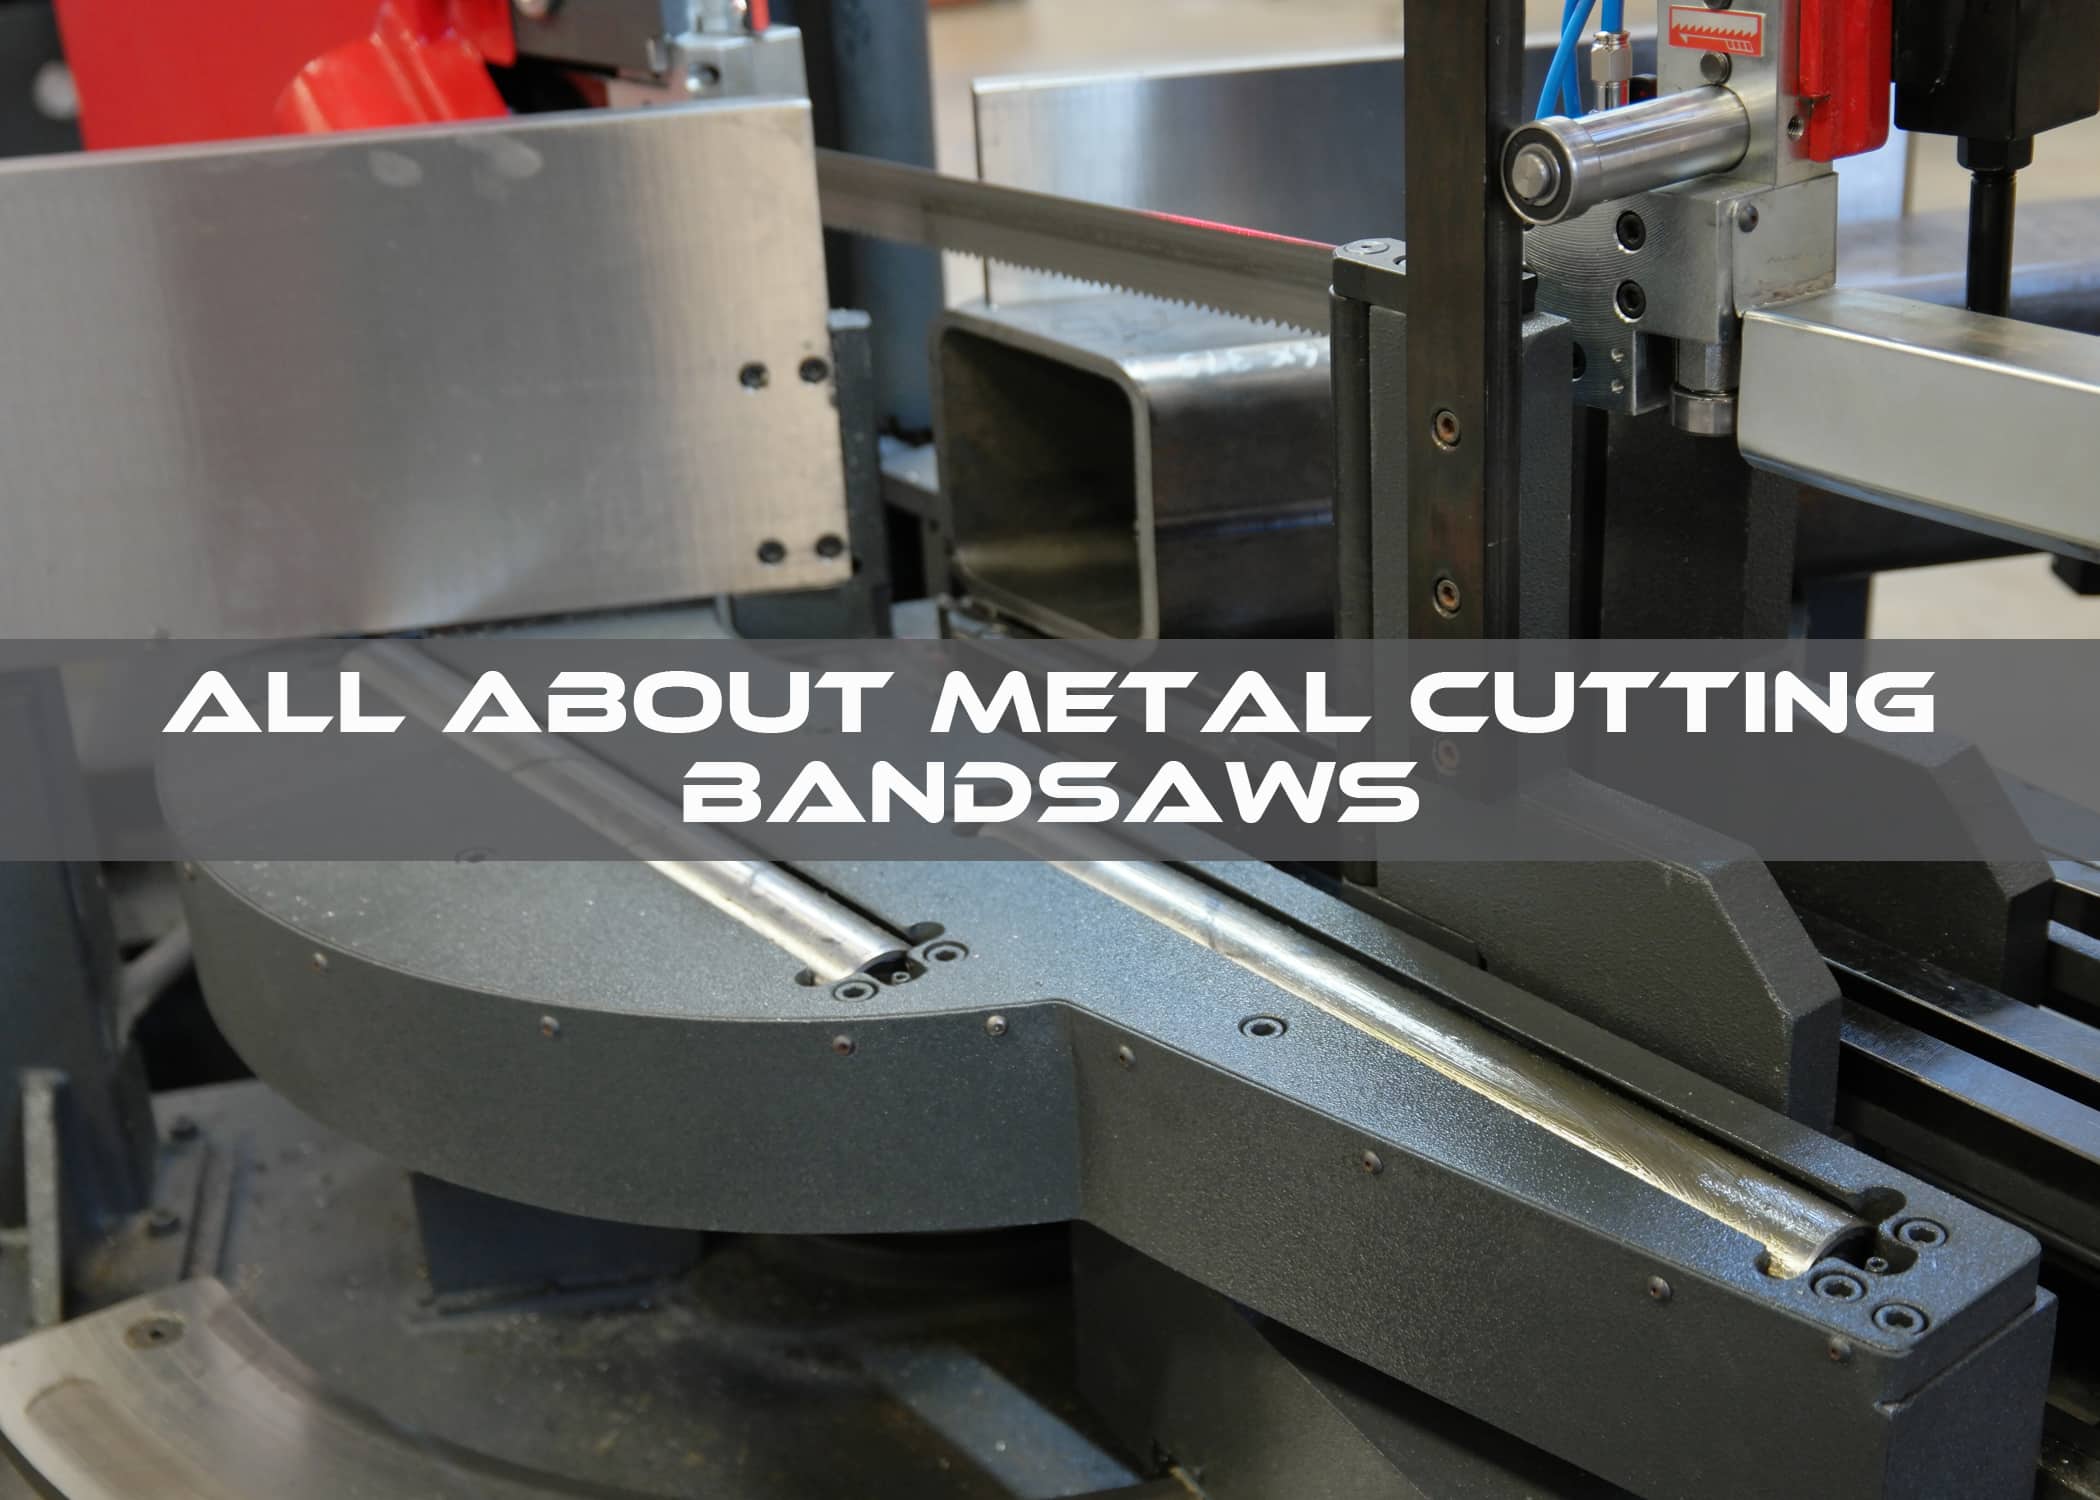 All About Metal-Cutting Bandsaws